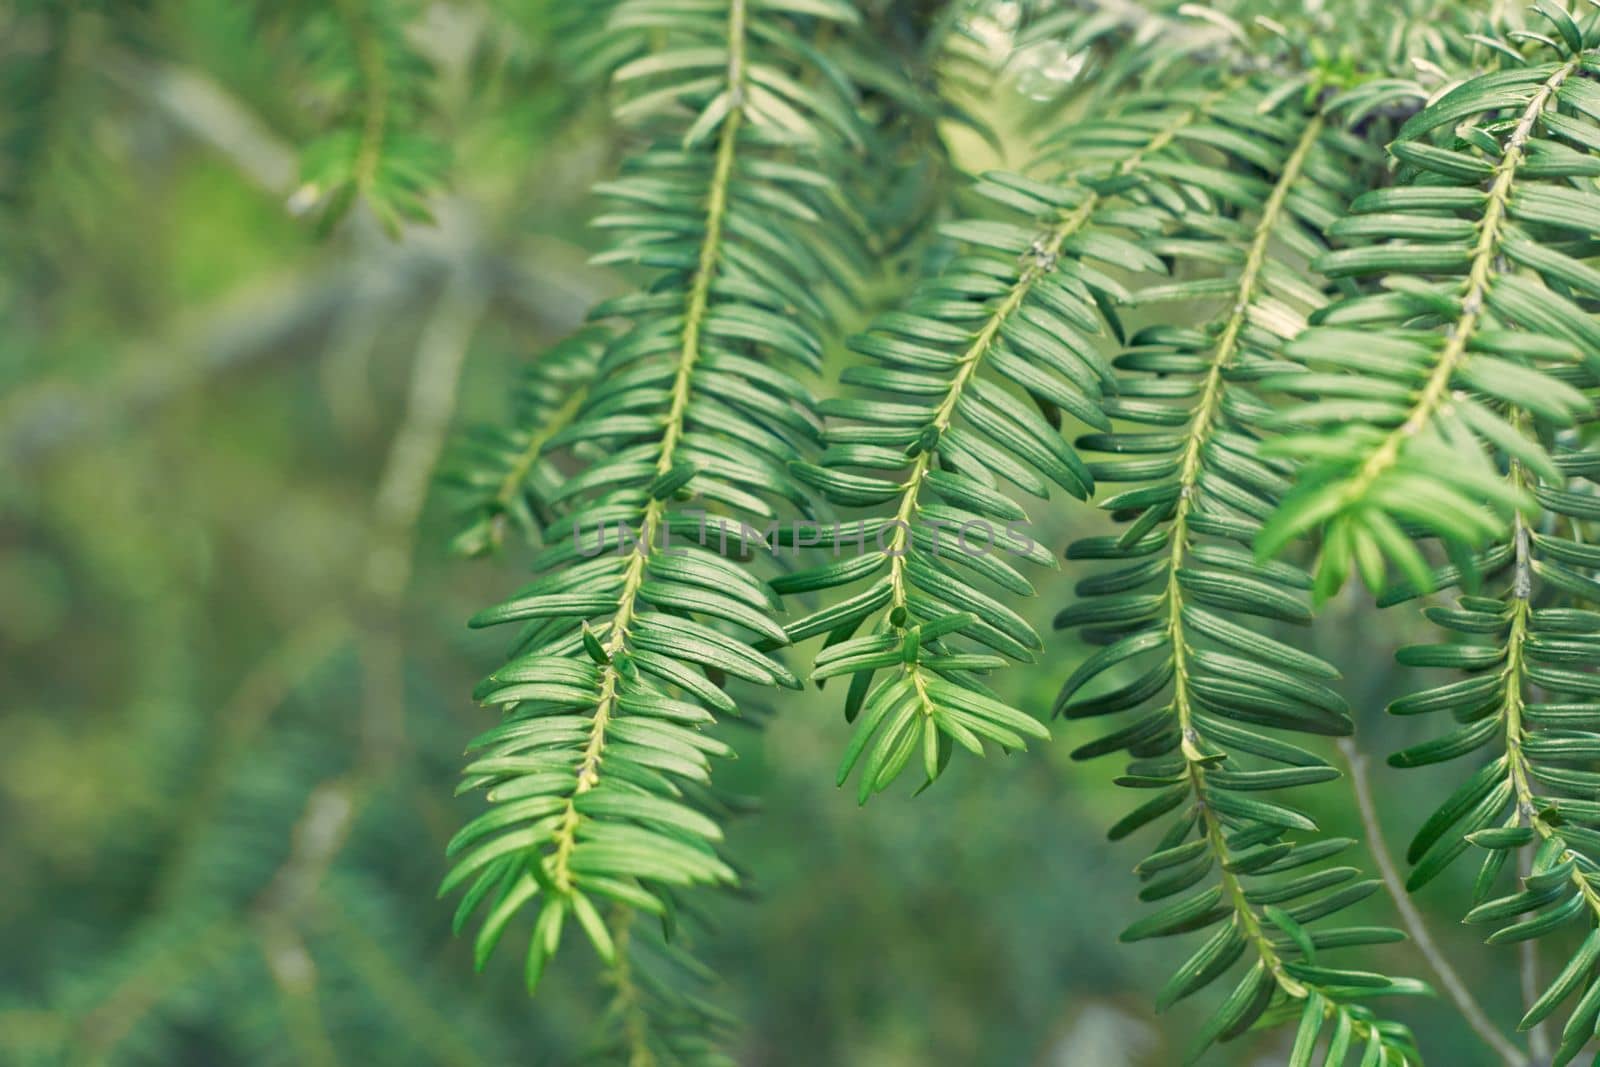 Taxus baccata green twig texture. Berry yew plant texture background. High quality photo